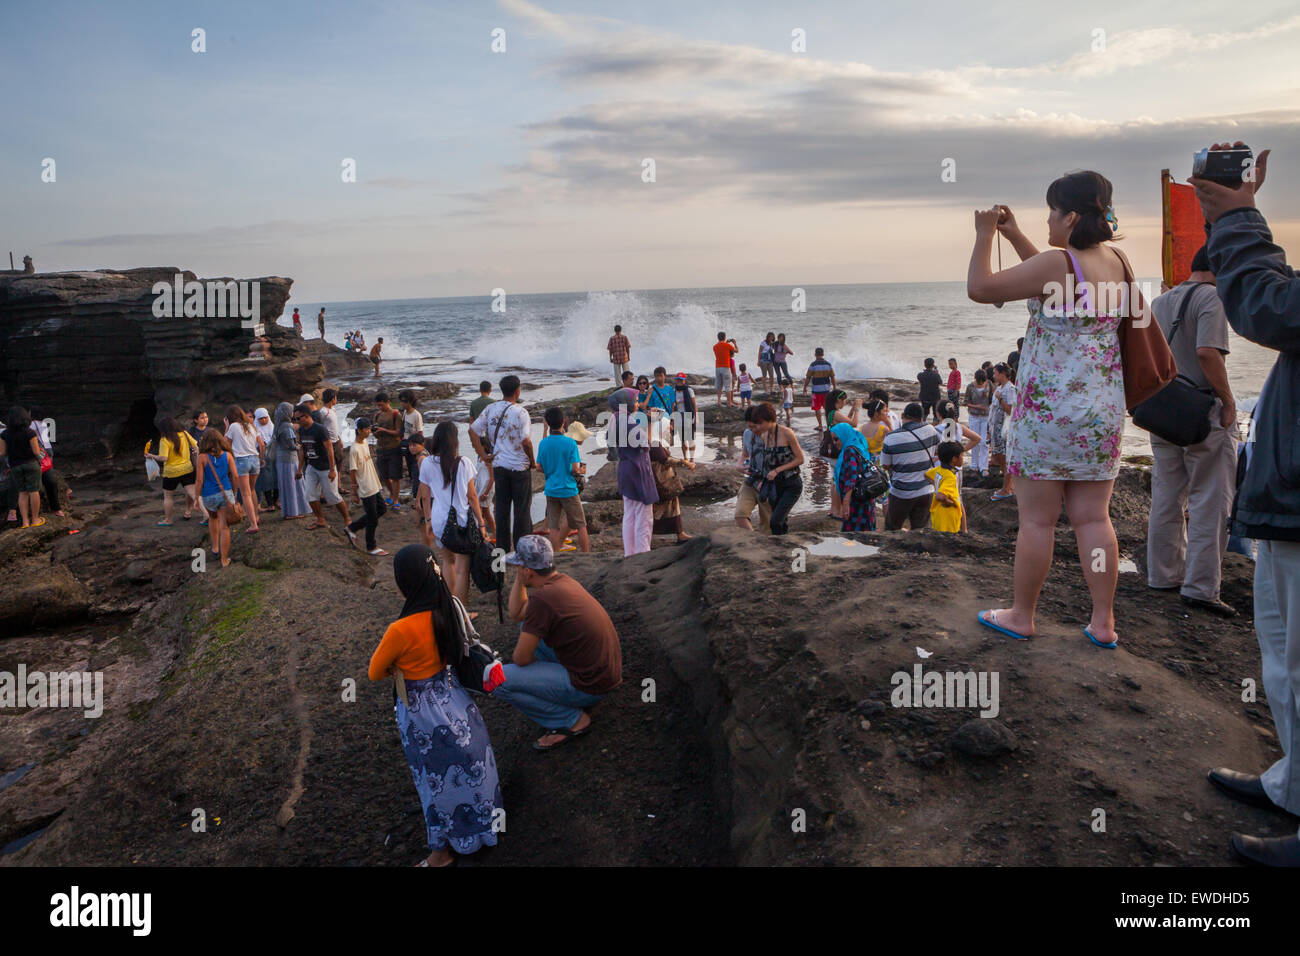 Tourists having leisure time on a rocky beach in Tanah Lot, Tabanan, Bali, Indonesia. Stock Photo